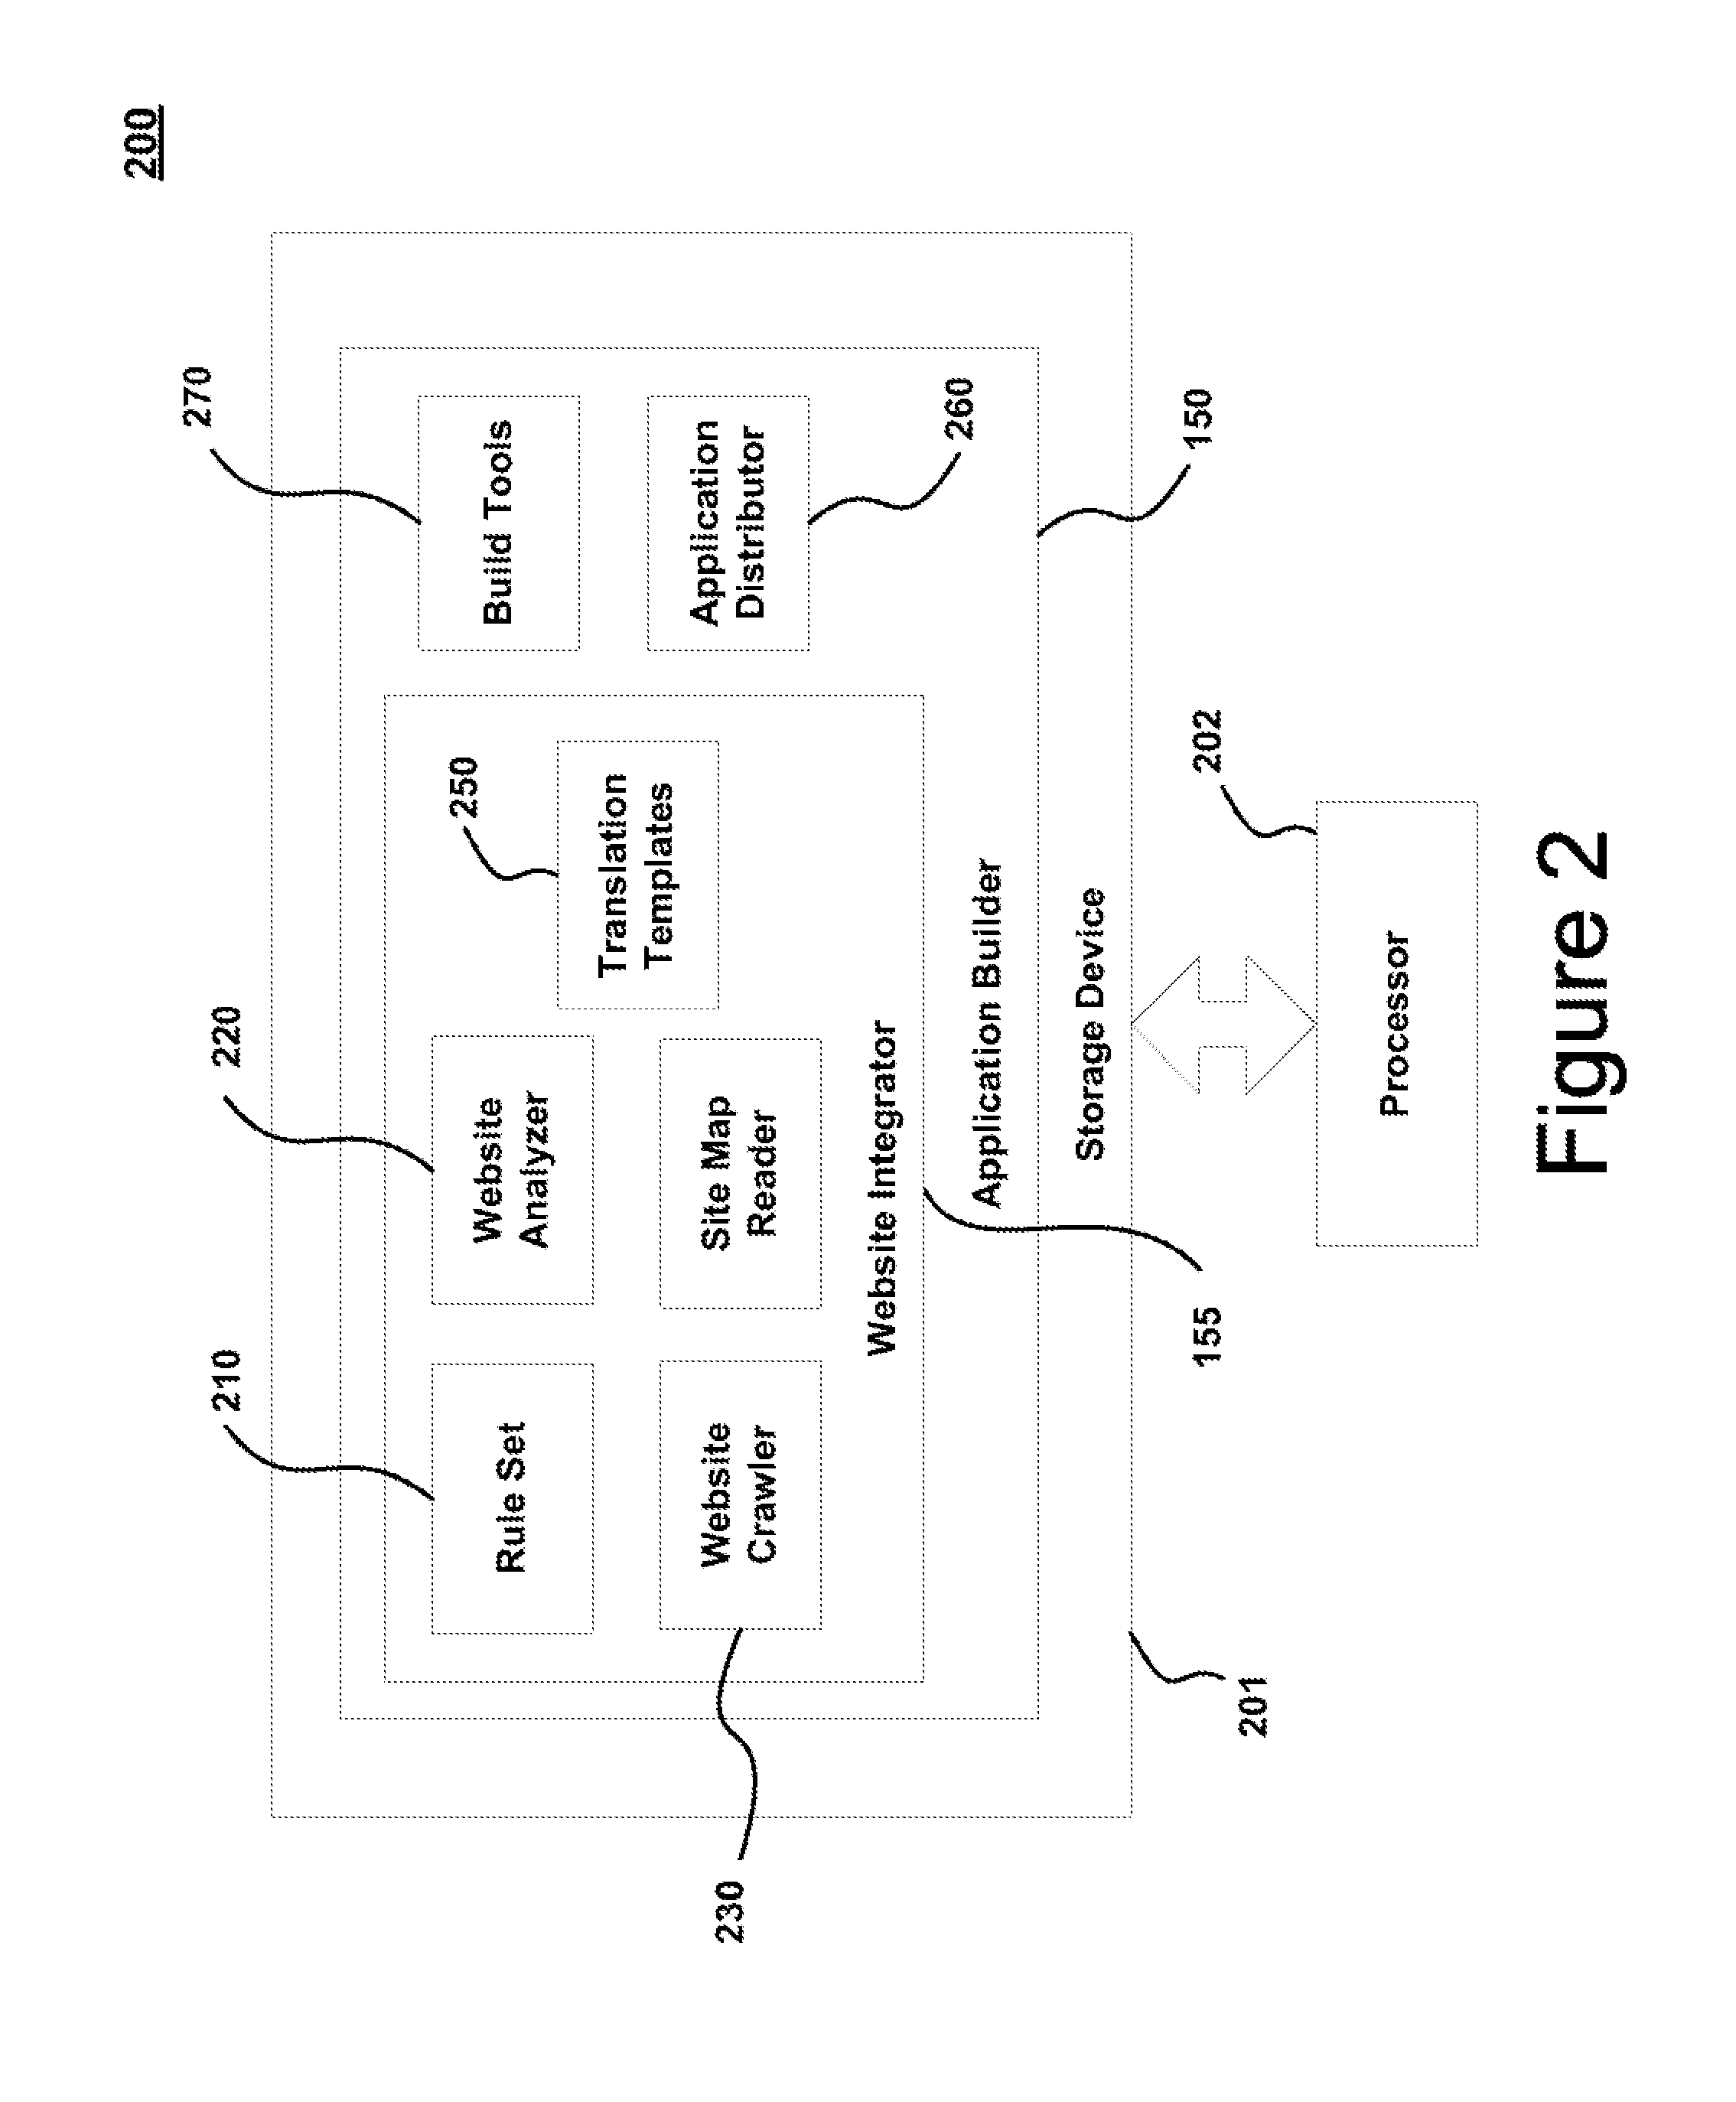 Systems and methods for creating or updating an application using website content